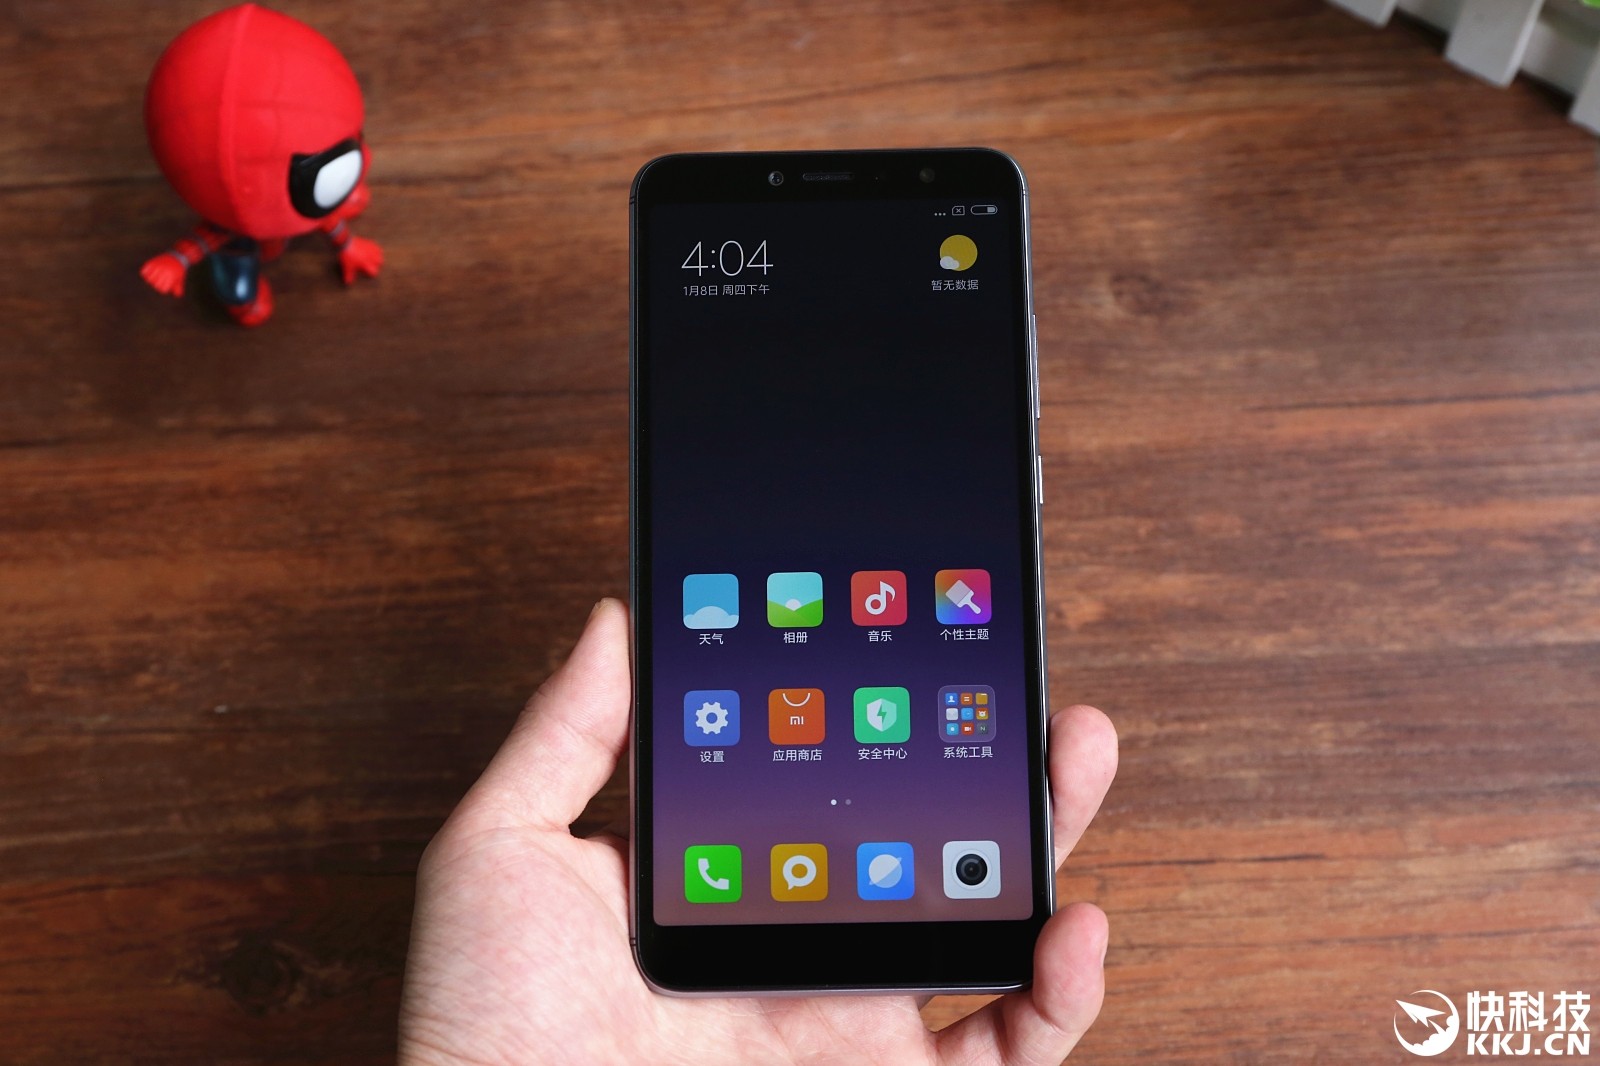 Xiaomi Redmi S2: unboxing and hands-on of the new entry level 